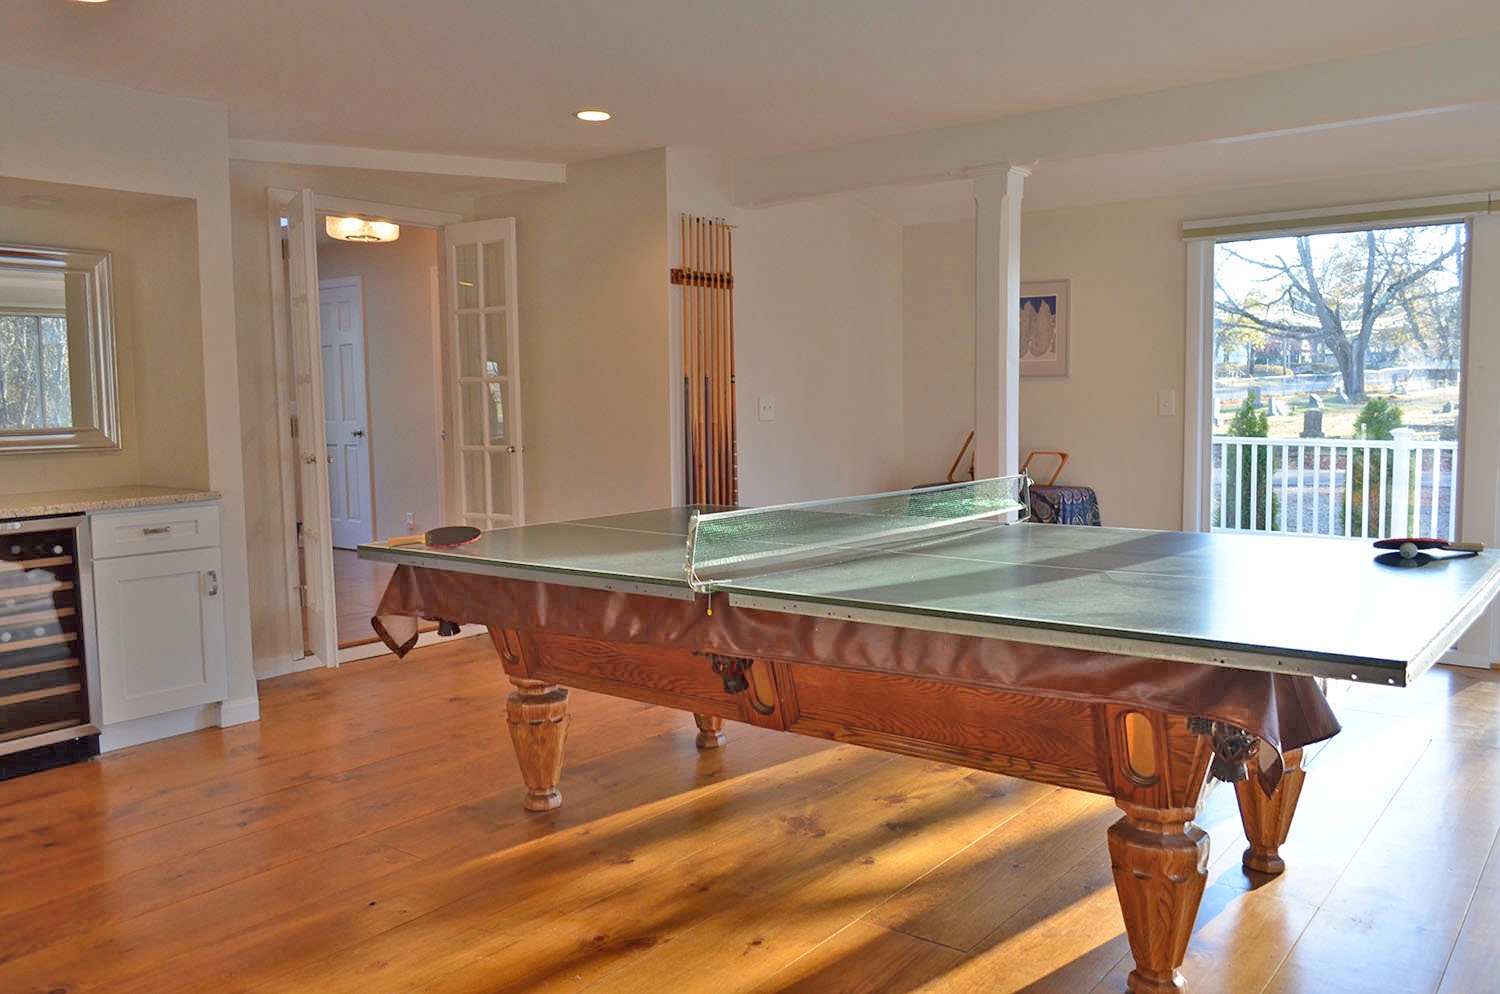 The pool table converts to allow table tennis.